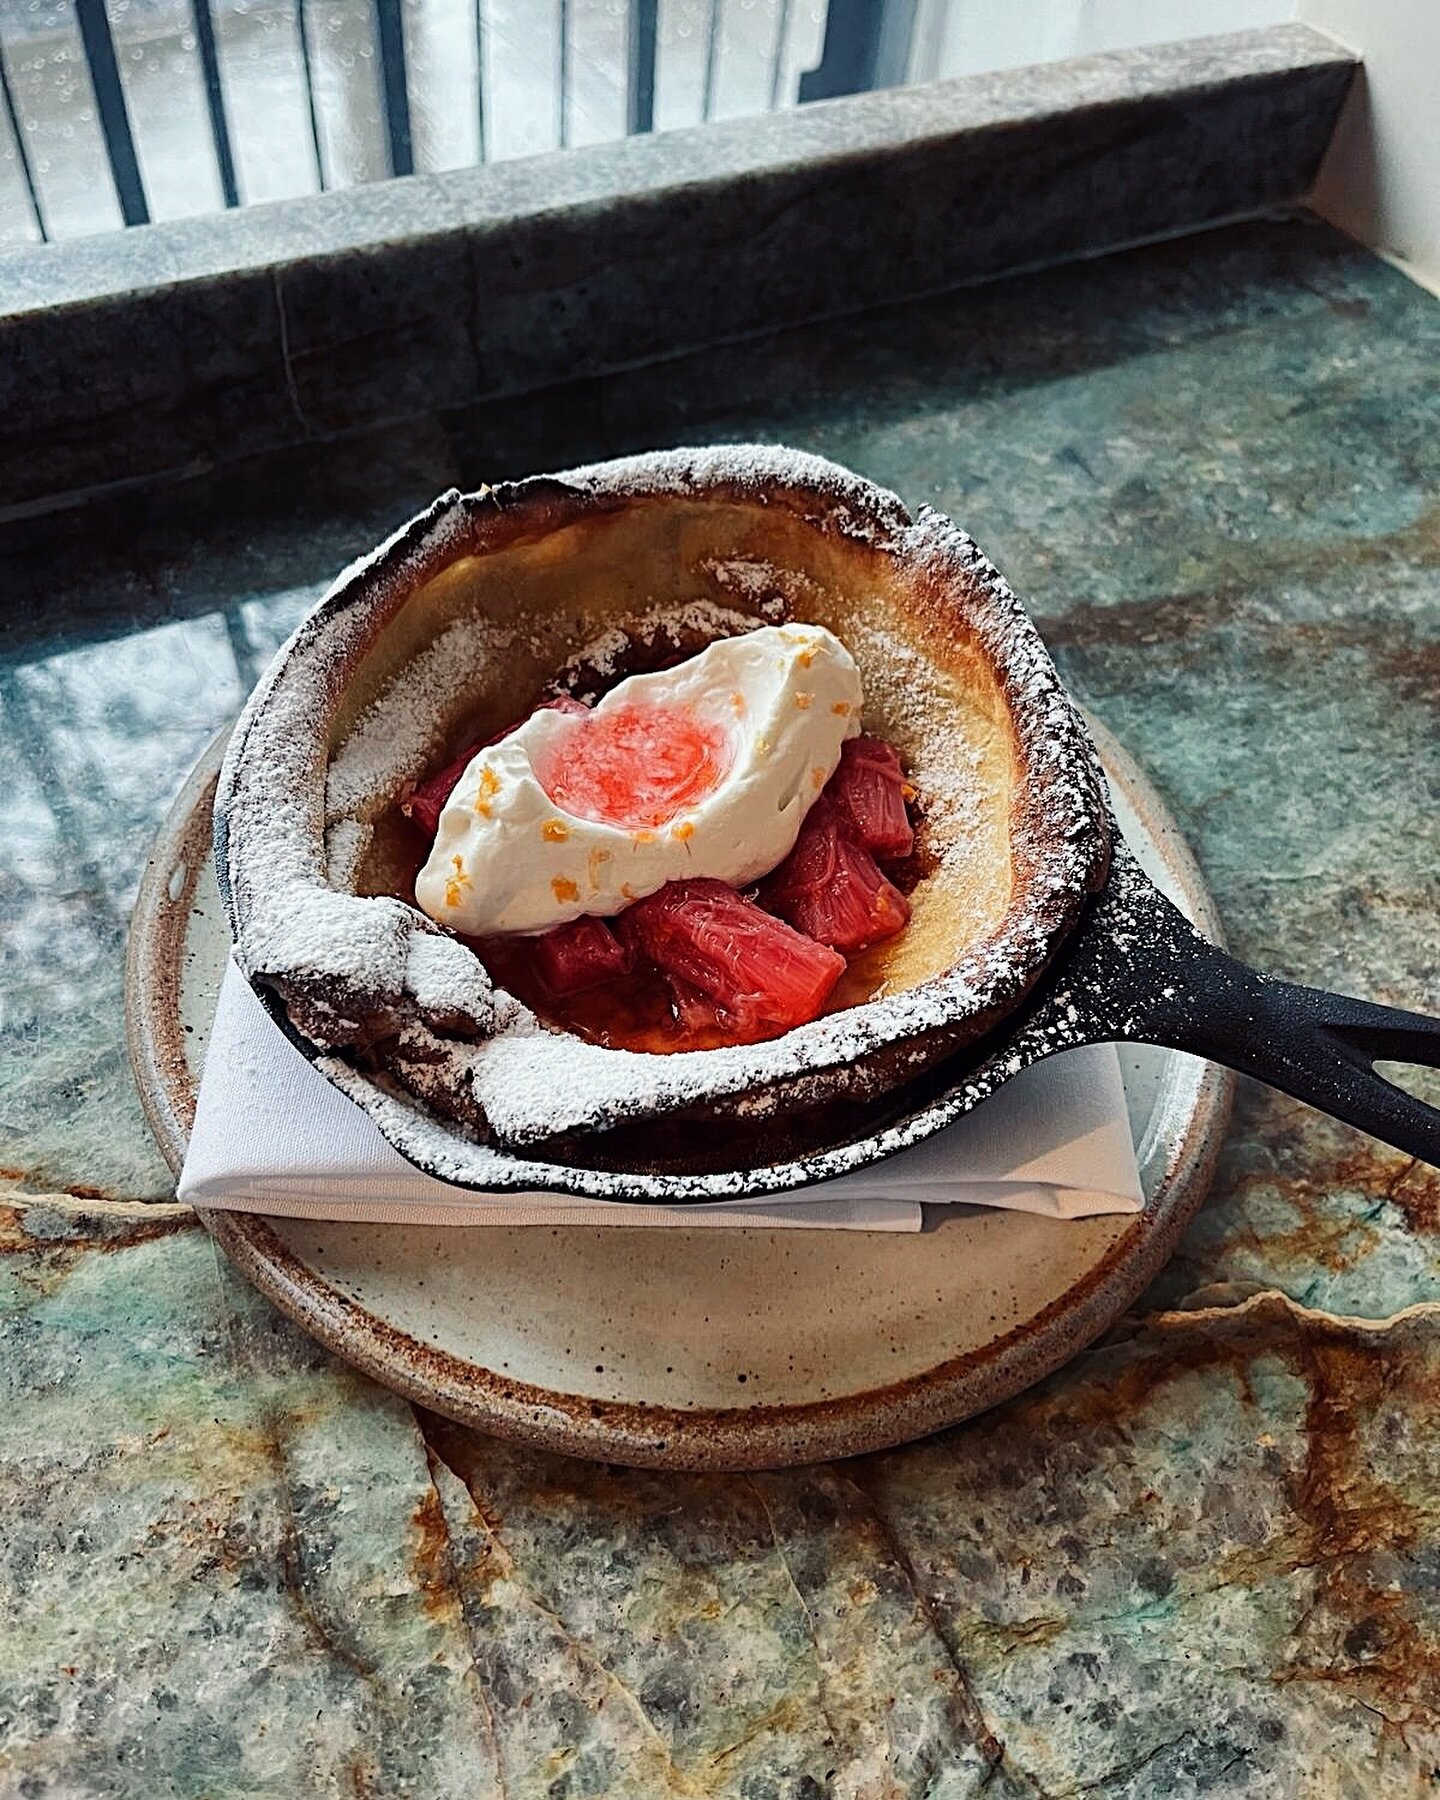 We&rsquo;re just three days away from our brunch launch!

This little Dutch baby will make its debut with poached rhubarb and whipped labneh alongside other heavy hitters like our saucy mushroom, open-faced focaccia toast; house-made chorizo, egg, an